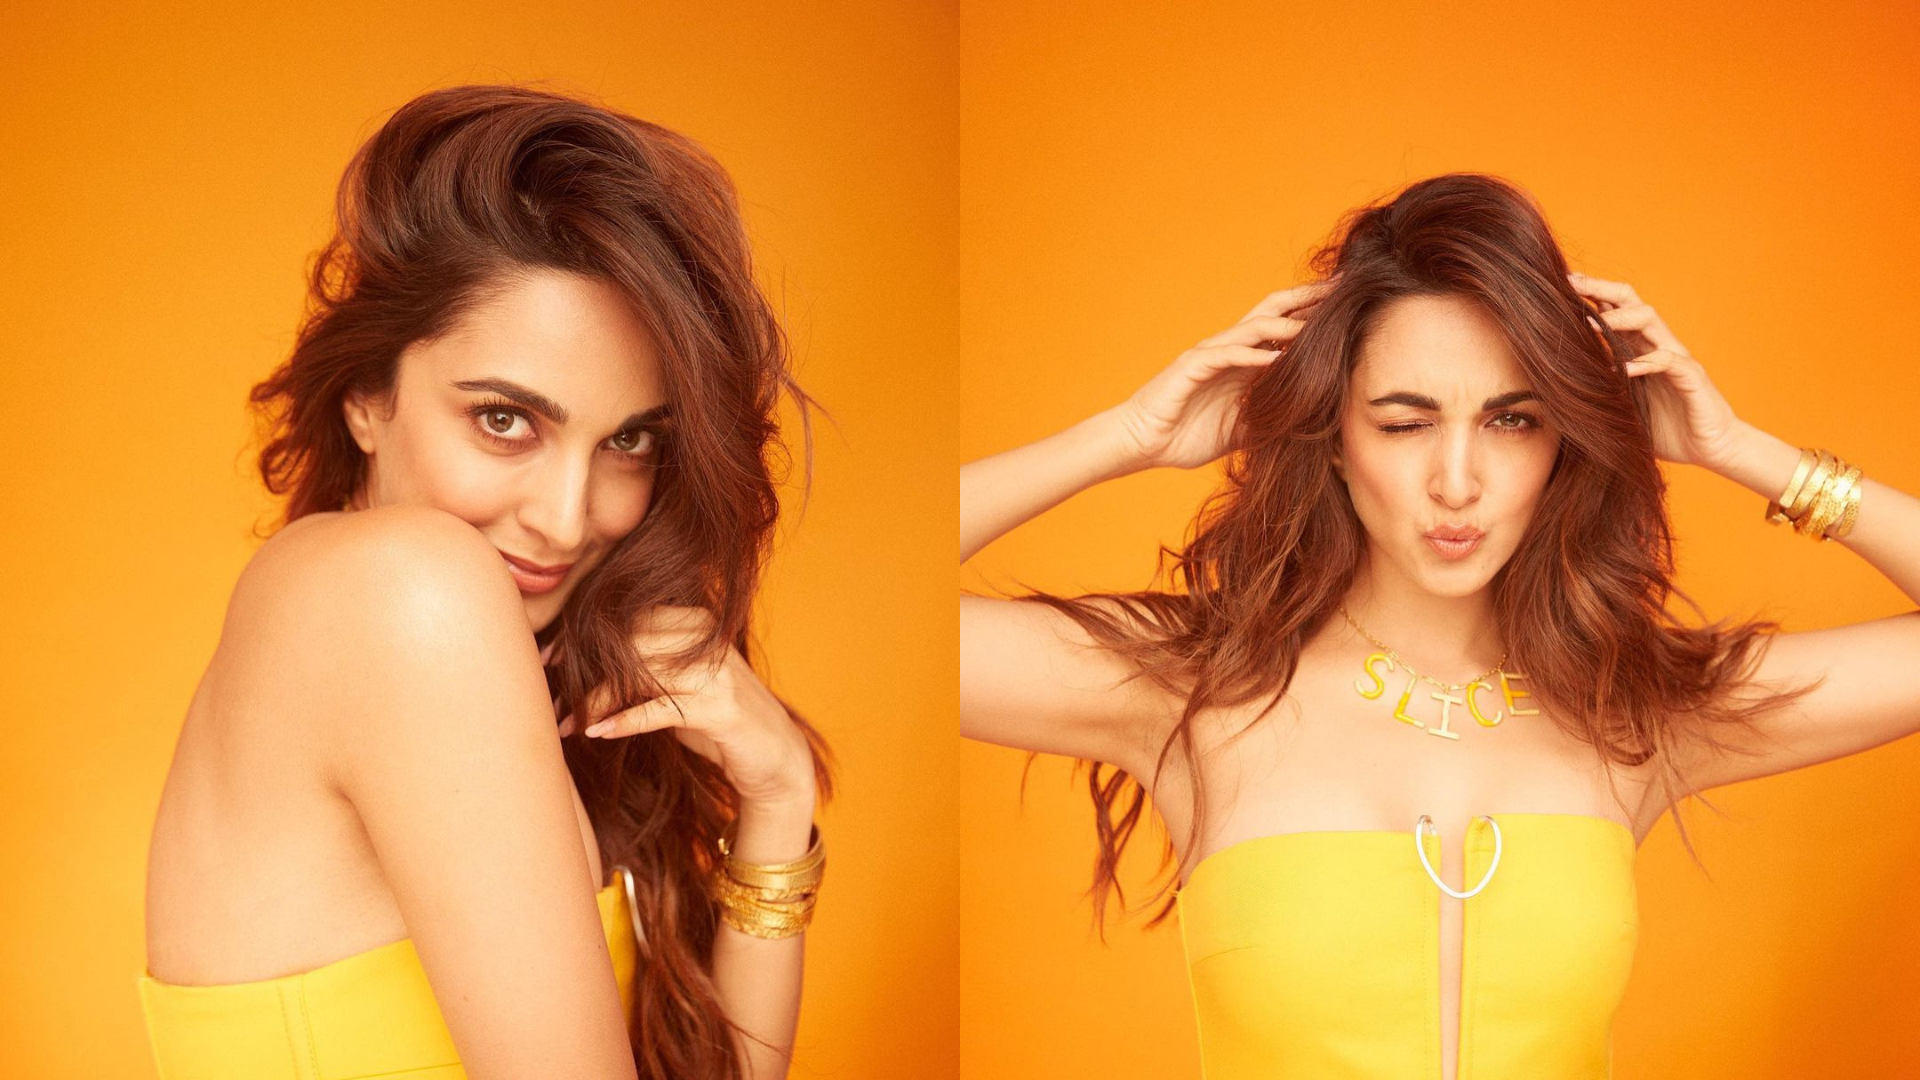 Kiara Advani | Kiara Advani dolls up in a dazzling yellow outfit and we are  not complaining - PHOTOS